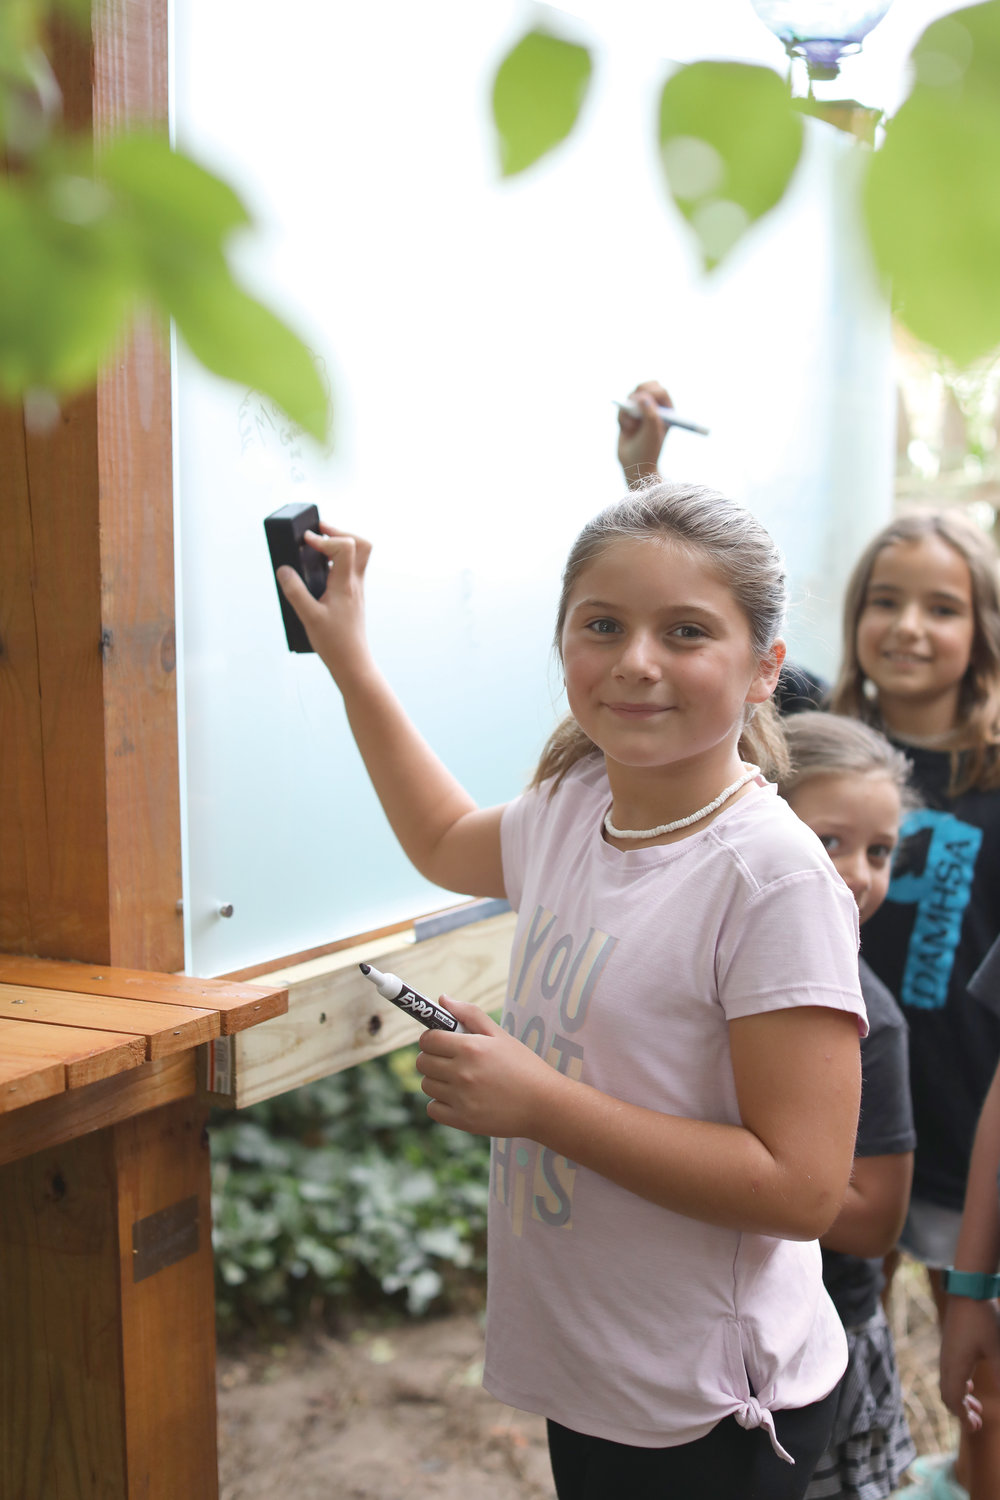 Shortly before the first day of school, students, parents and teachers help put the finishing touches on the Sister Mary Angelus Outdoor Classroom.